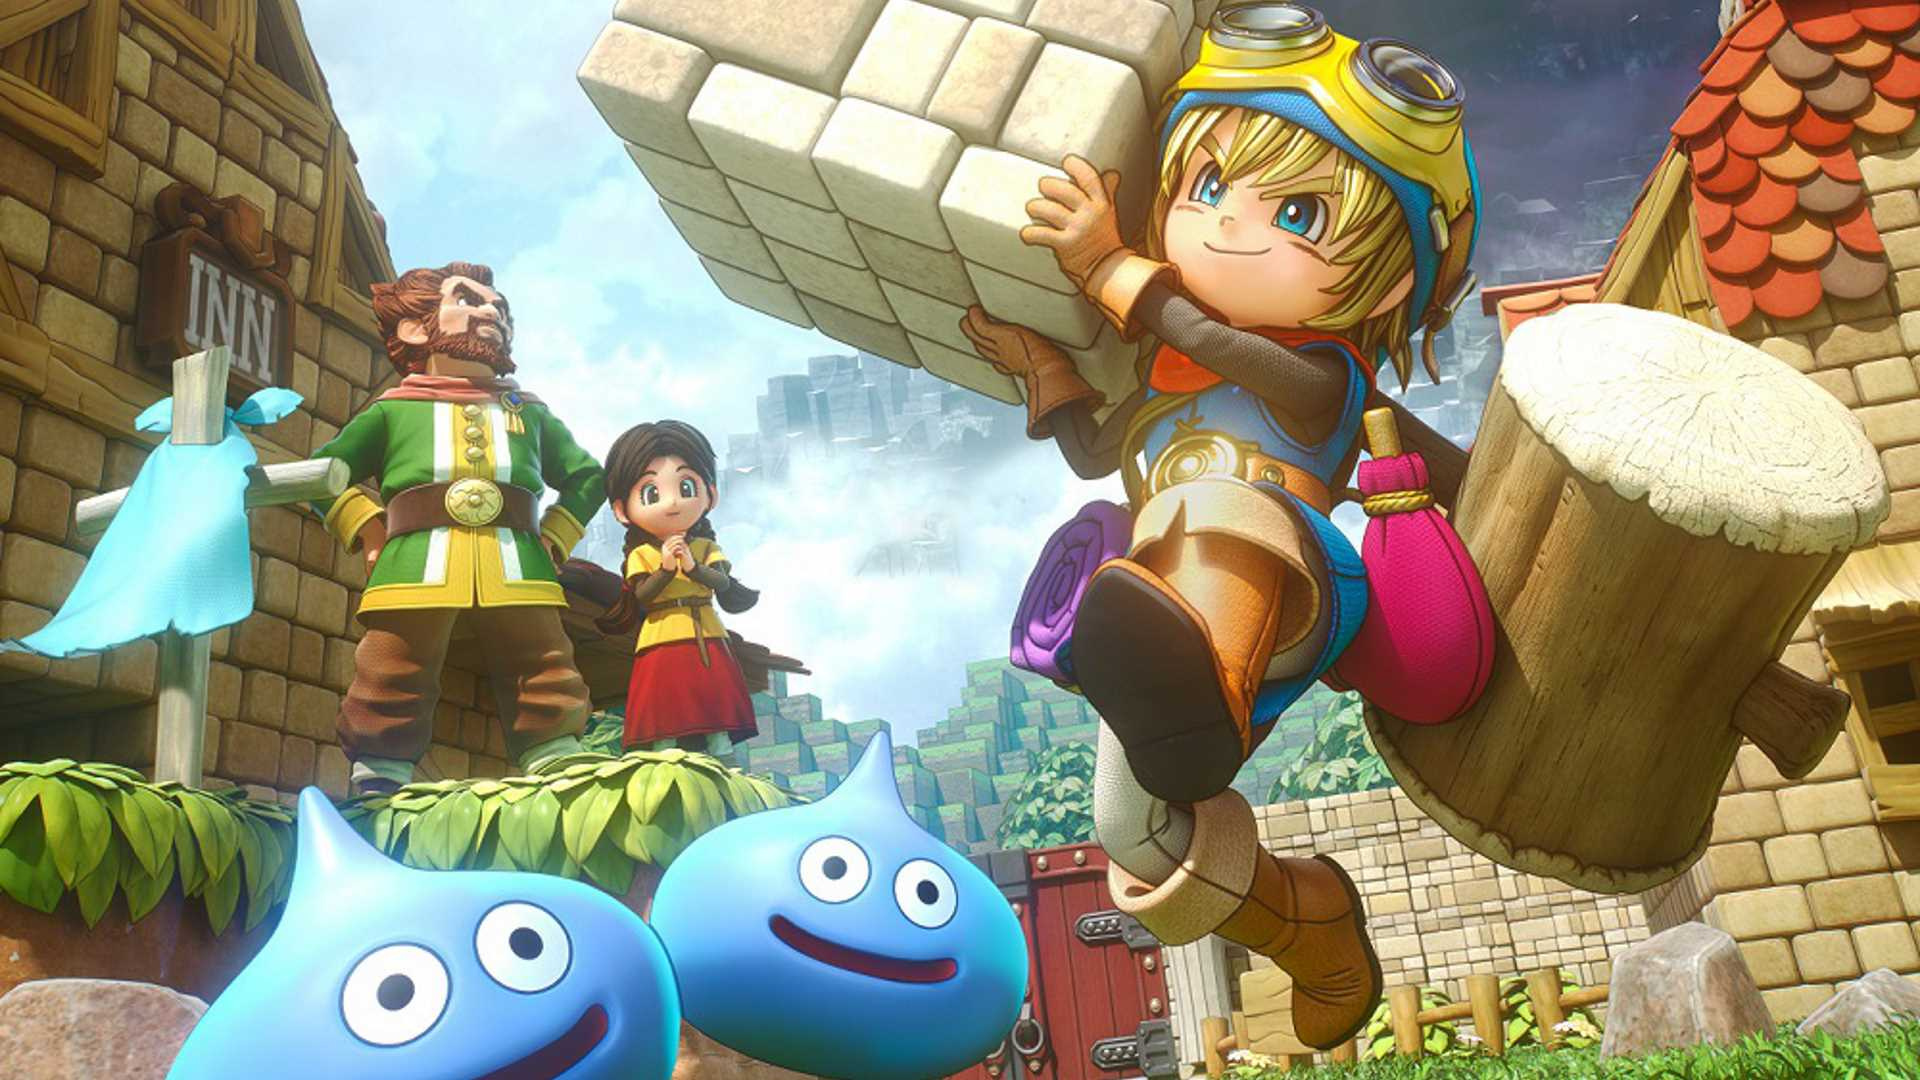 Hands On: Dragon Quest Builders Is One of the Most Addictive Games of